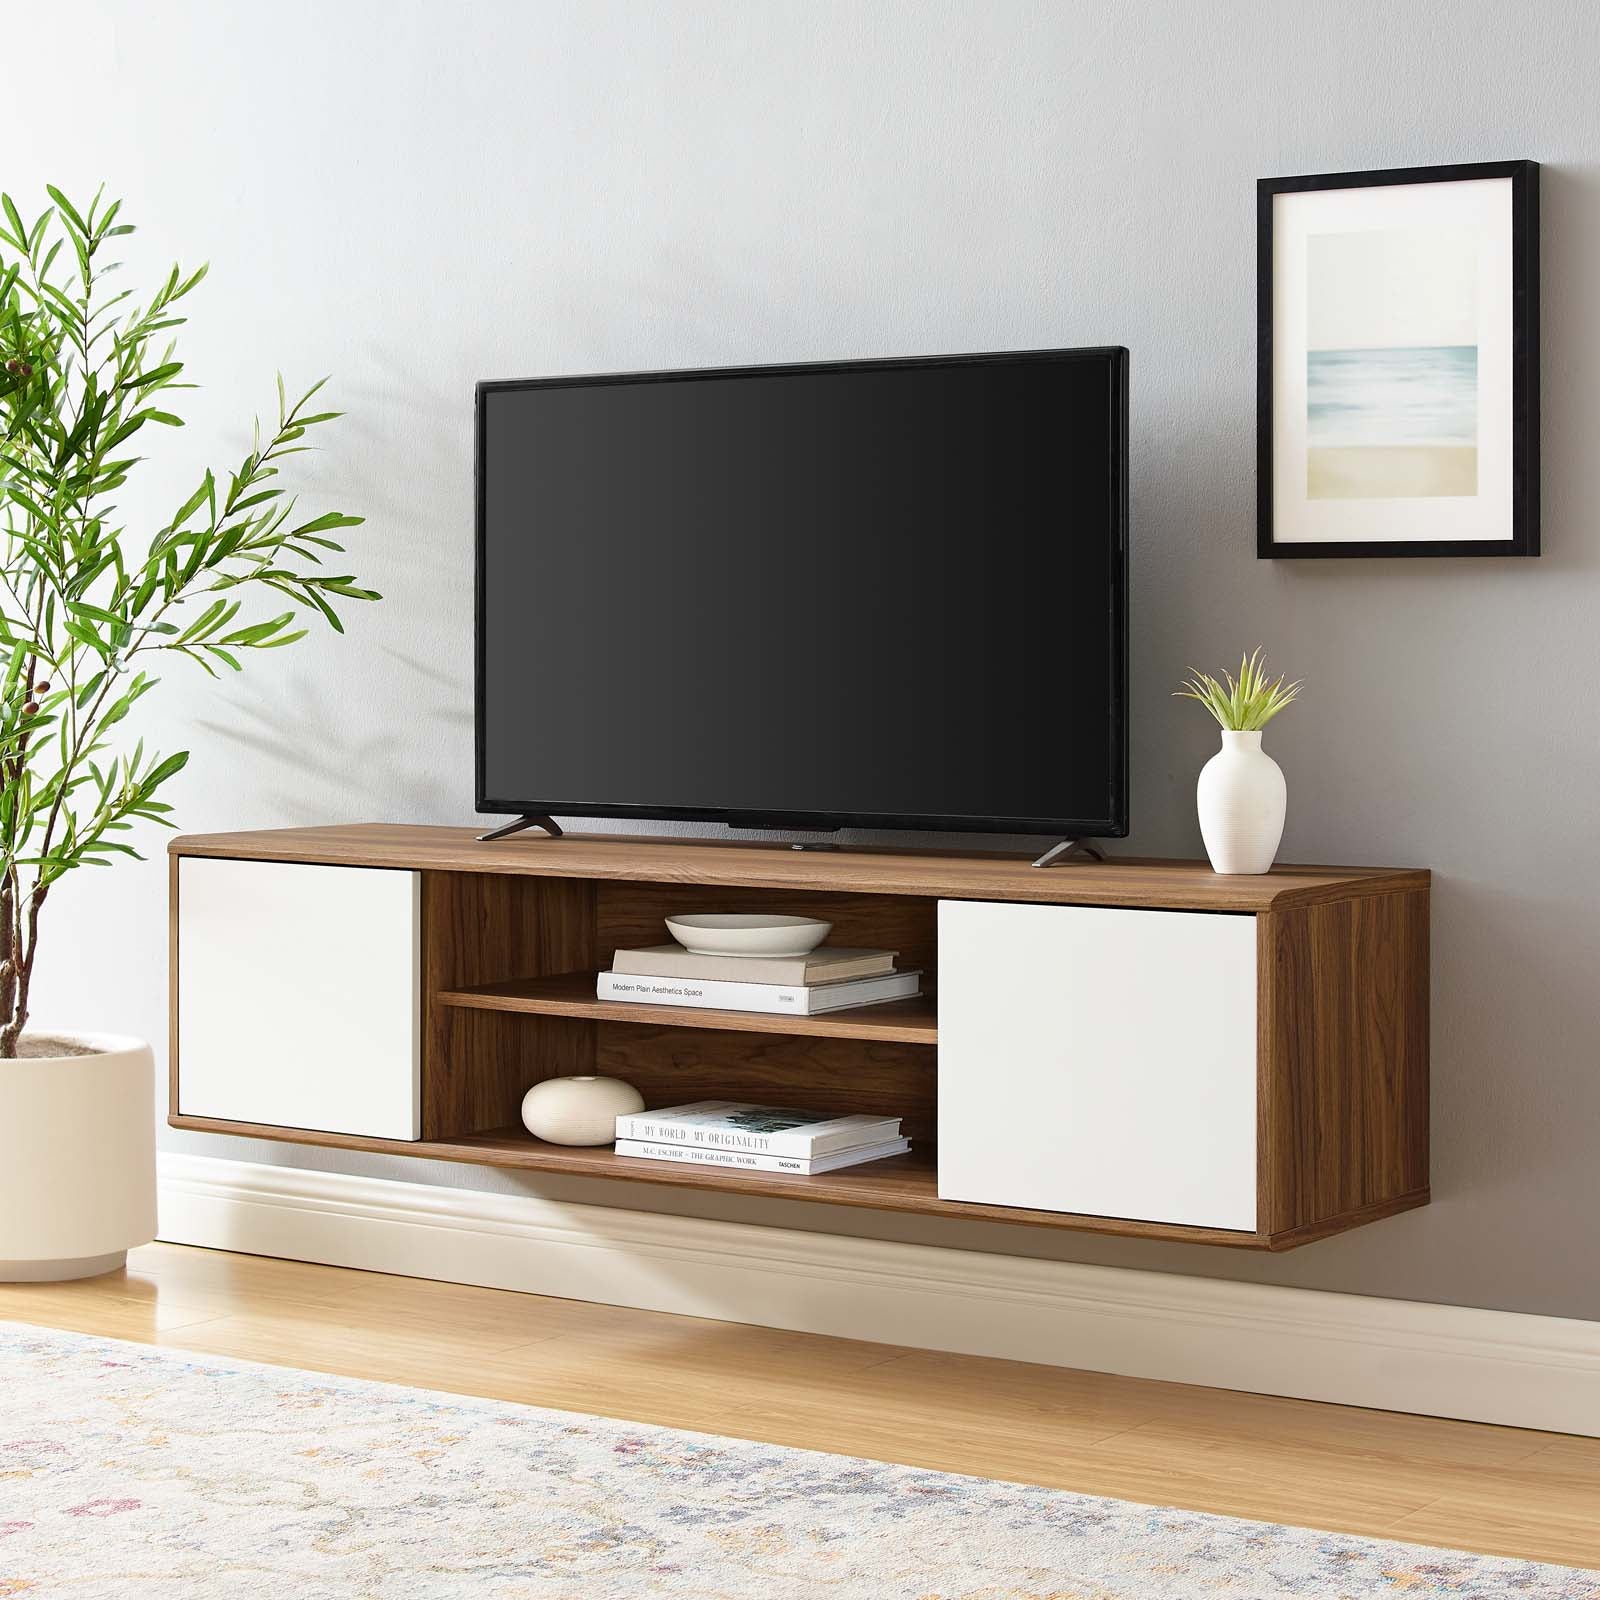 Transmit 60" Wall Mount TV Stand - East Shore Modern Home Furnishings